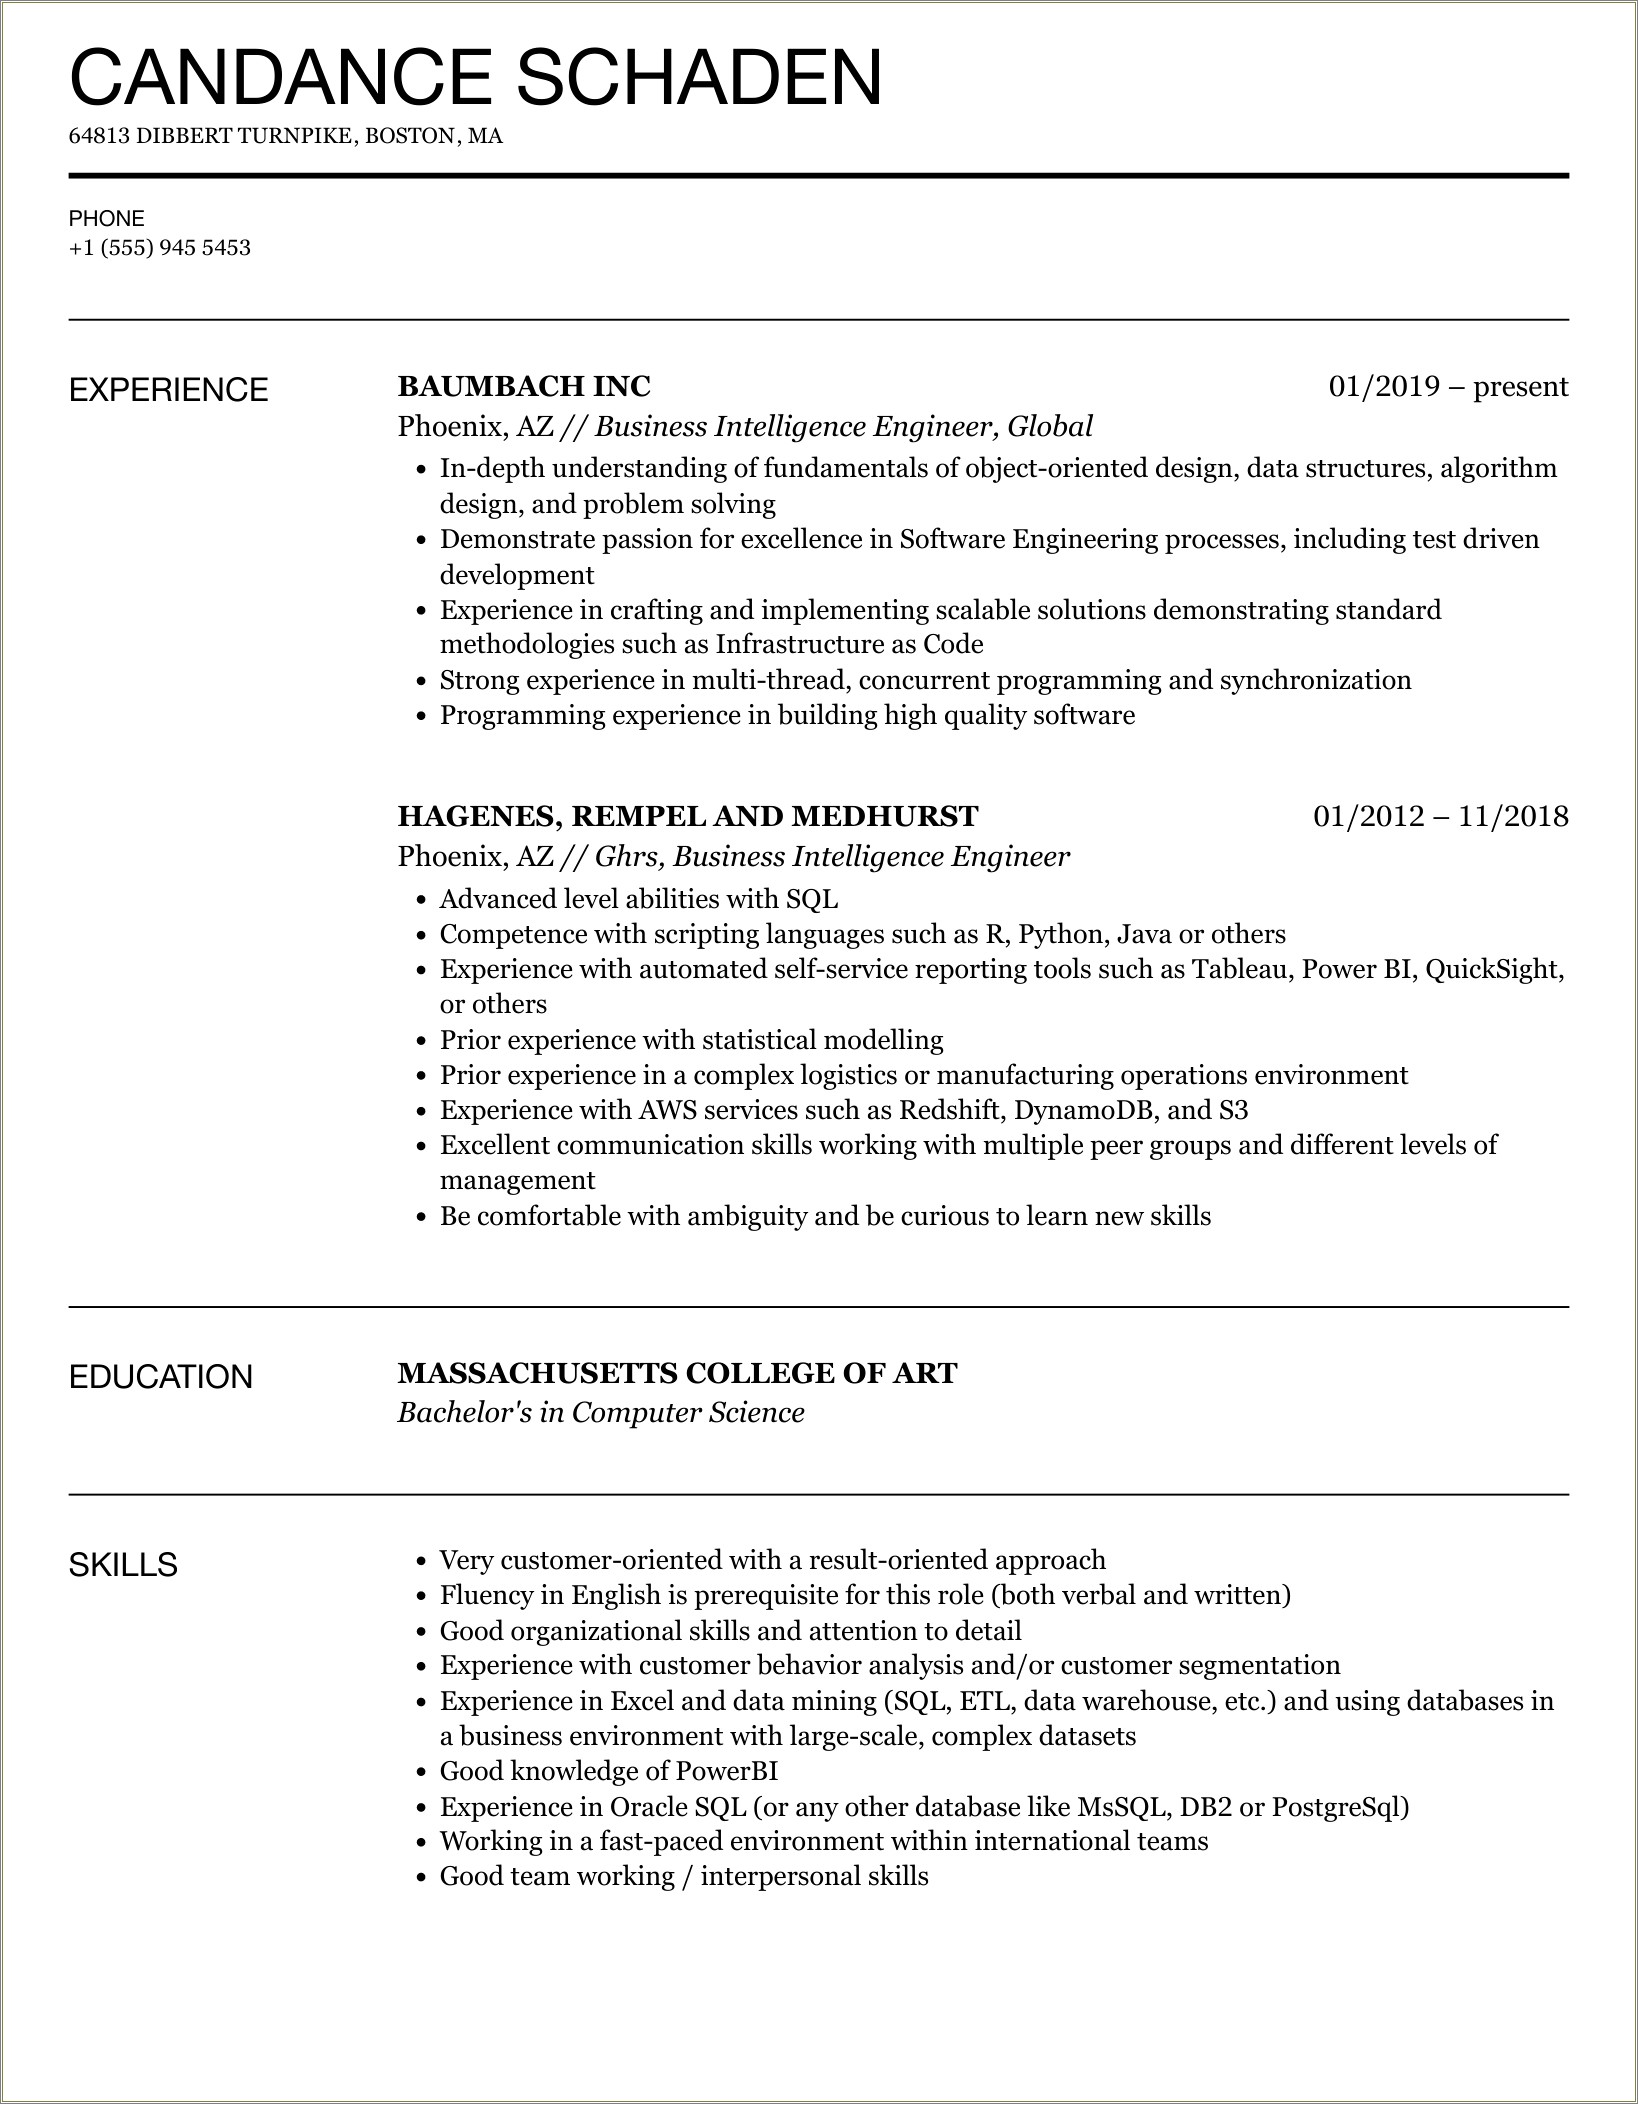 Resume With Multi Threading Synchronization Experience